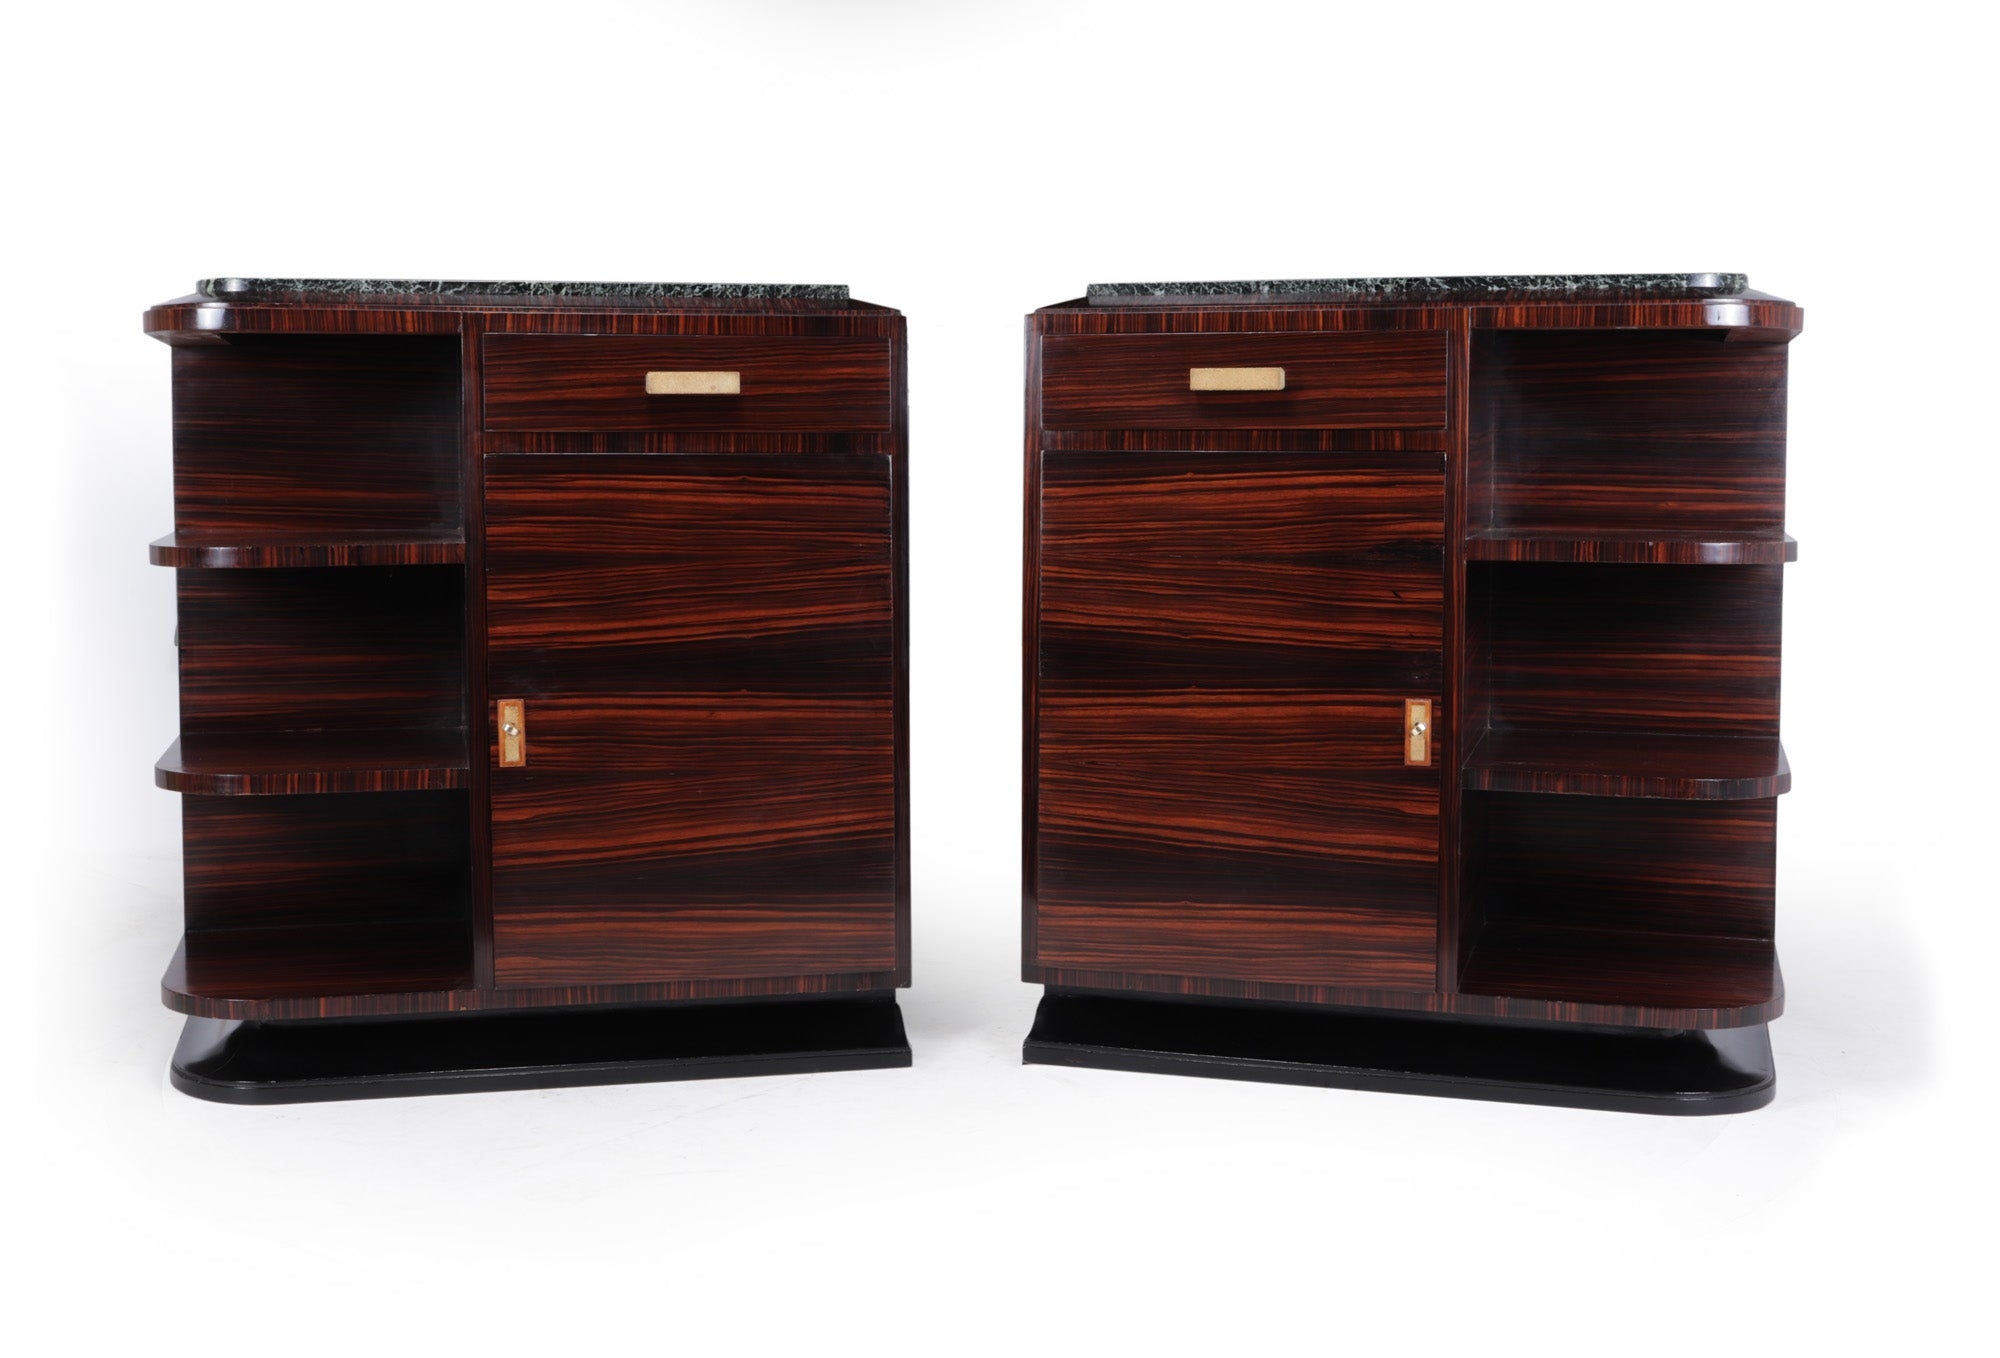 Pair of French Art Deco Macassar Ebony Cabinets – The Furniture Rooms